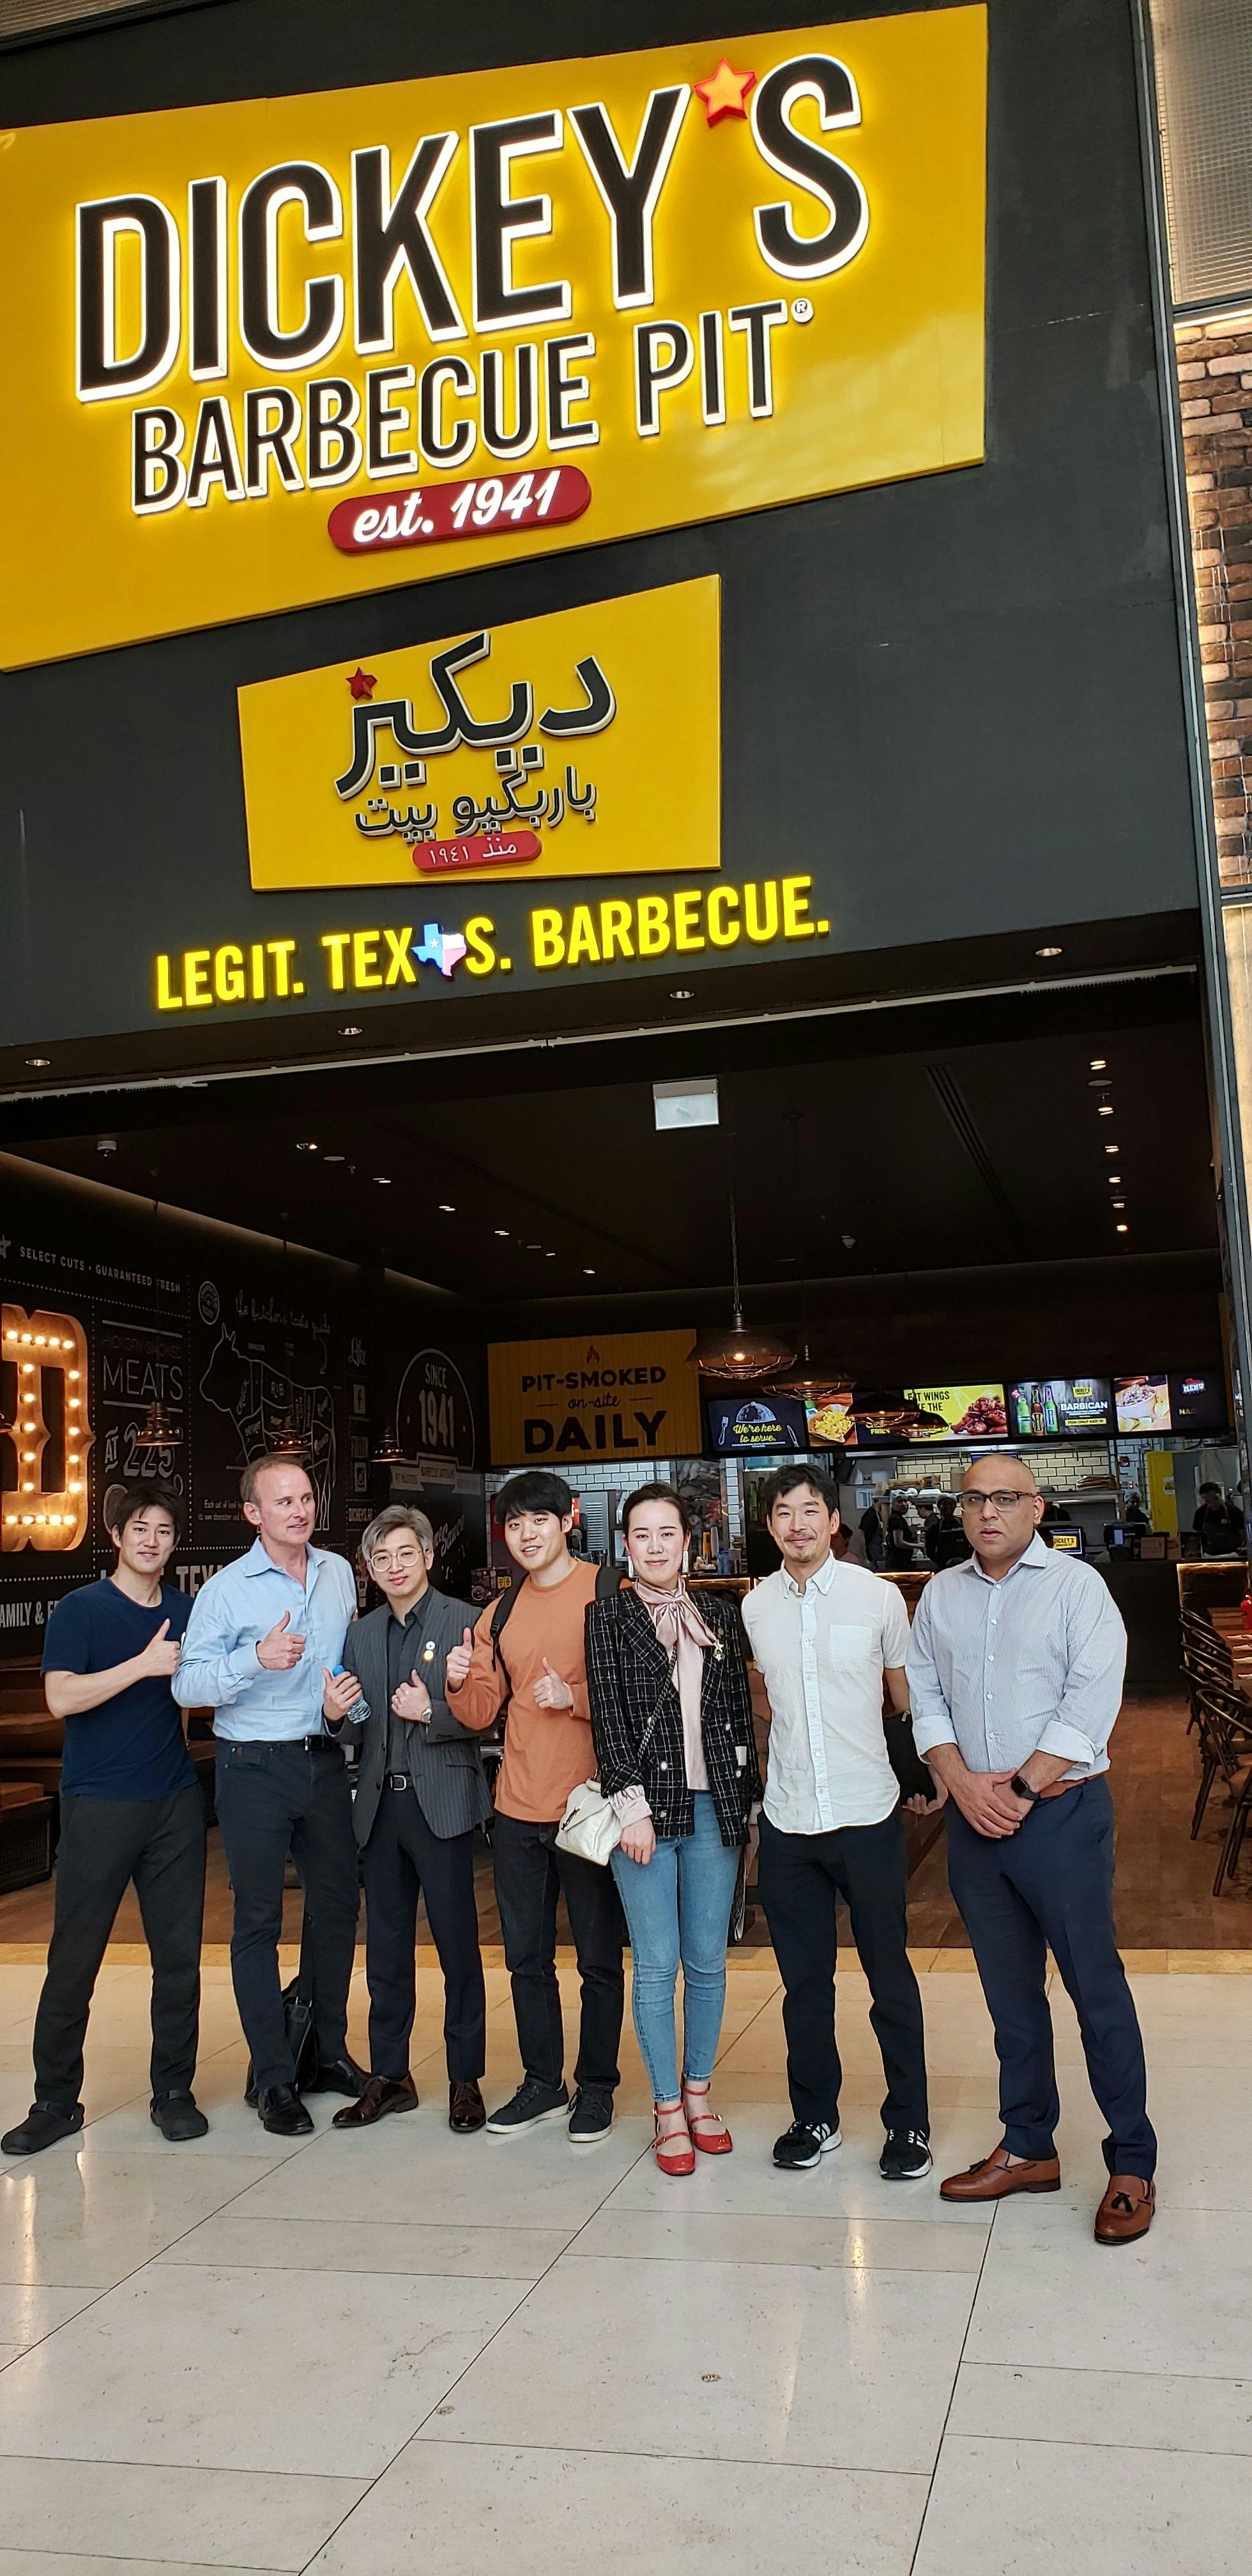 Dickey's Barbecue Pit Enters Key Franchise Agreement and Expands Into Japan